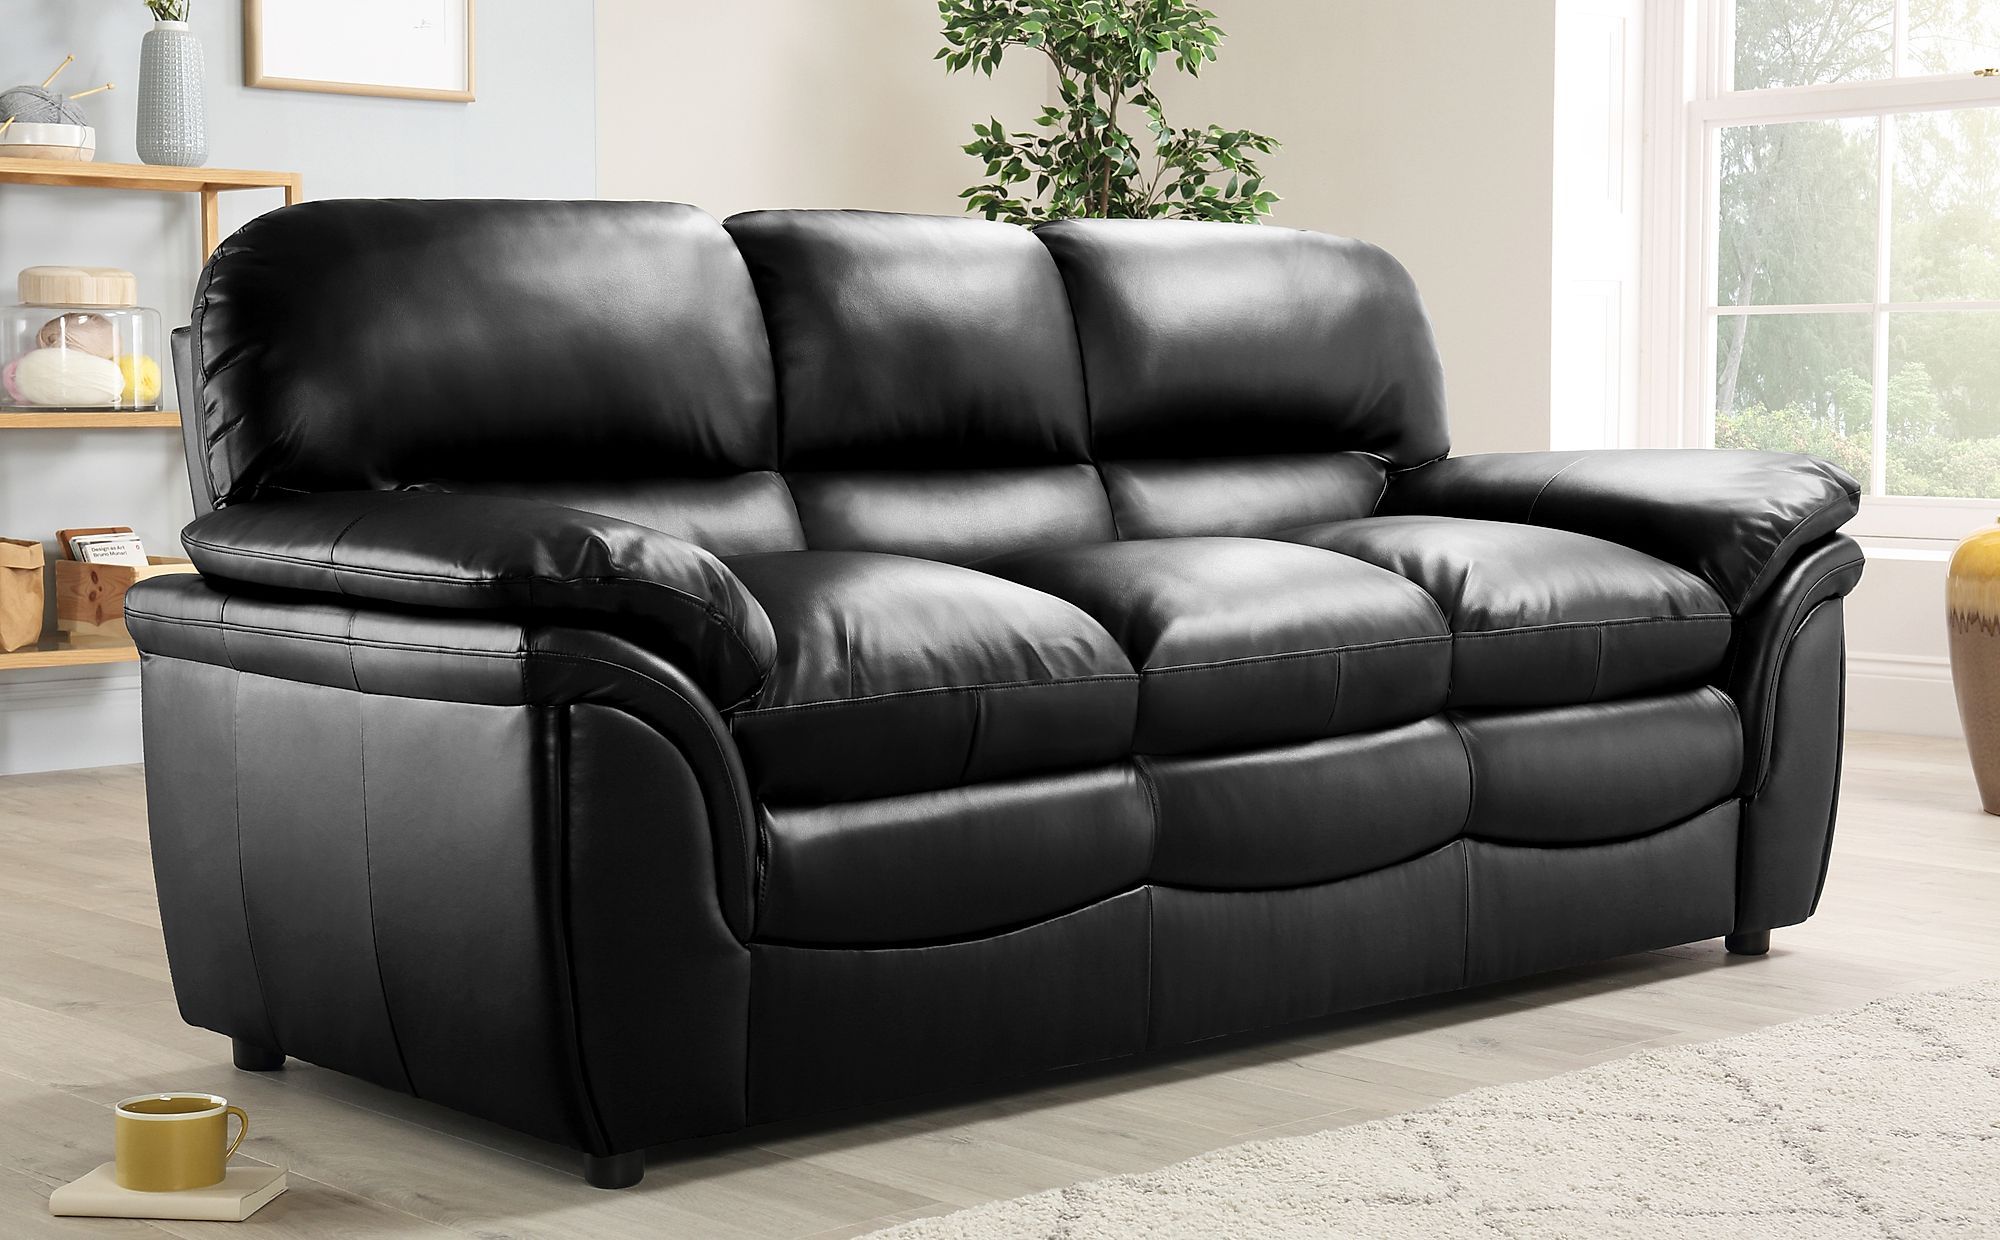 Rochester Black Leather 3 Seater Sofa | Furniture Choice Within 3 Seat L Shaped Sofas In Black (View 11 of 20)